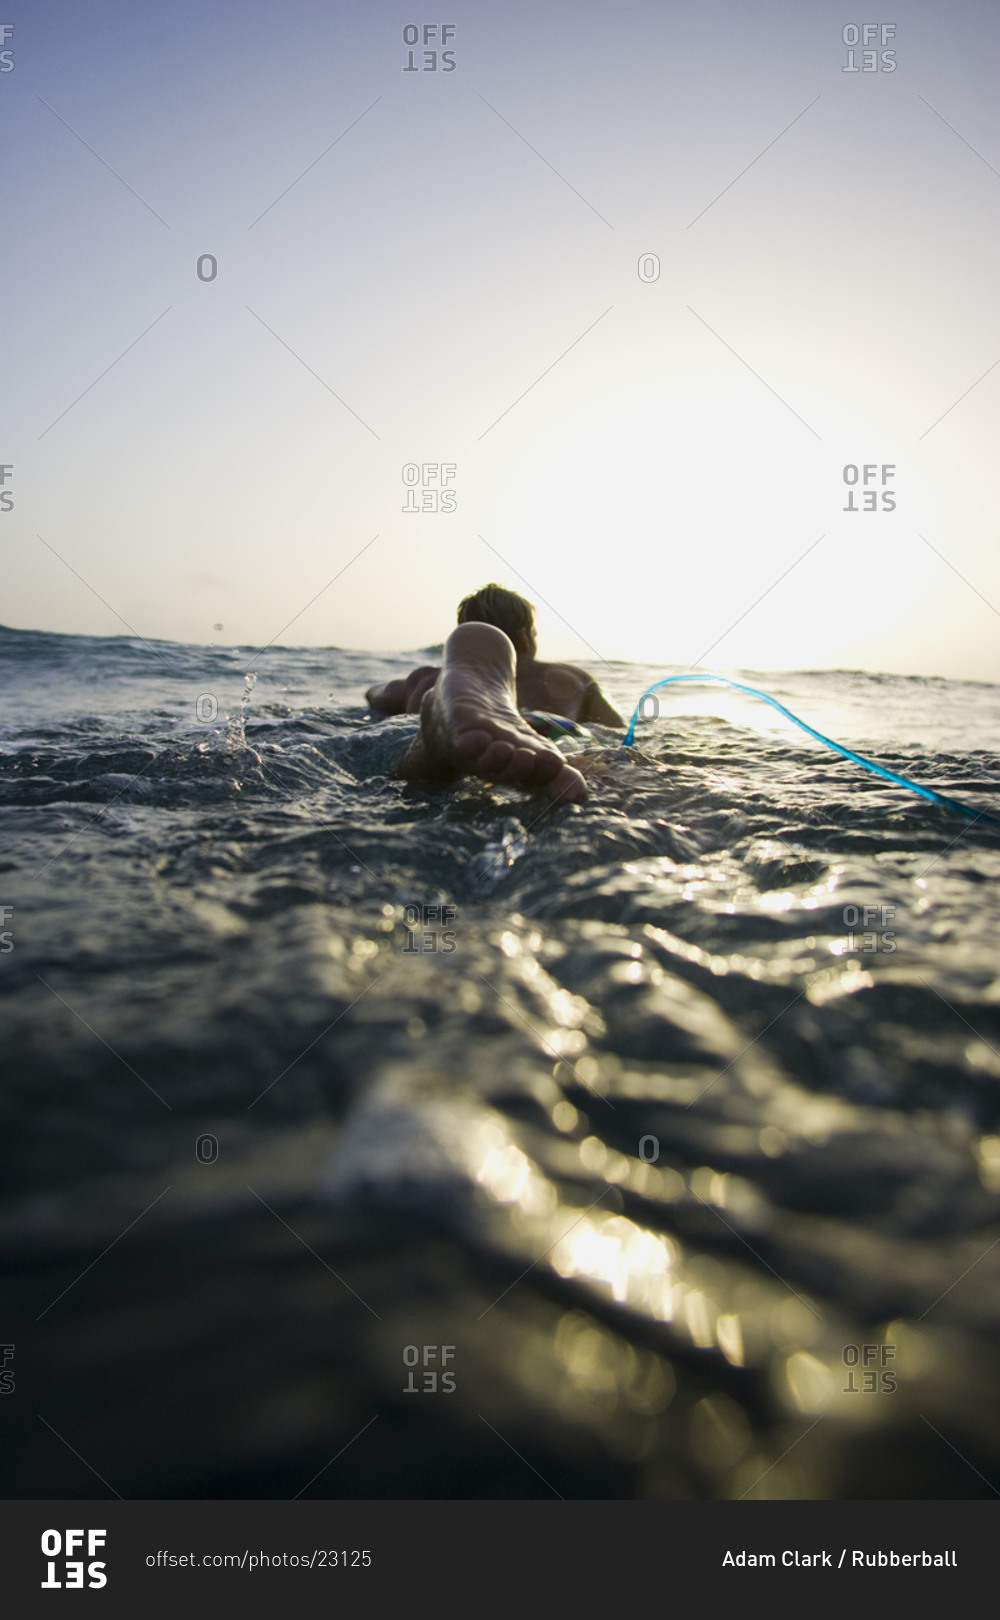 Rear view of man in water with rope